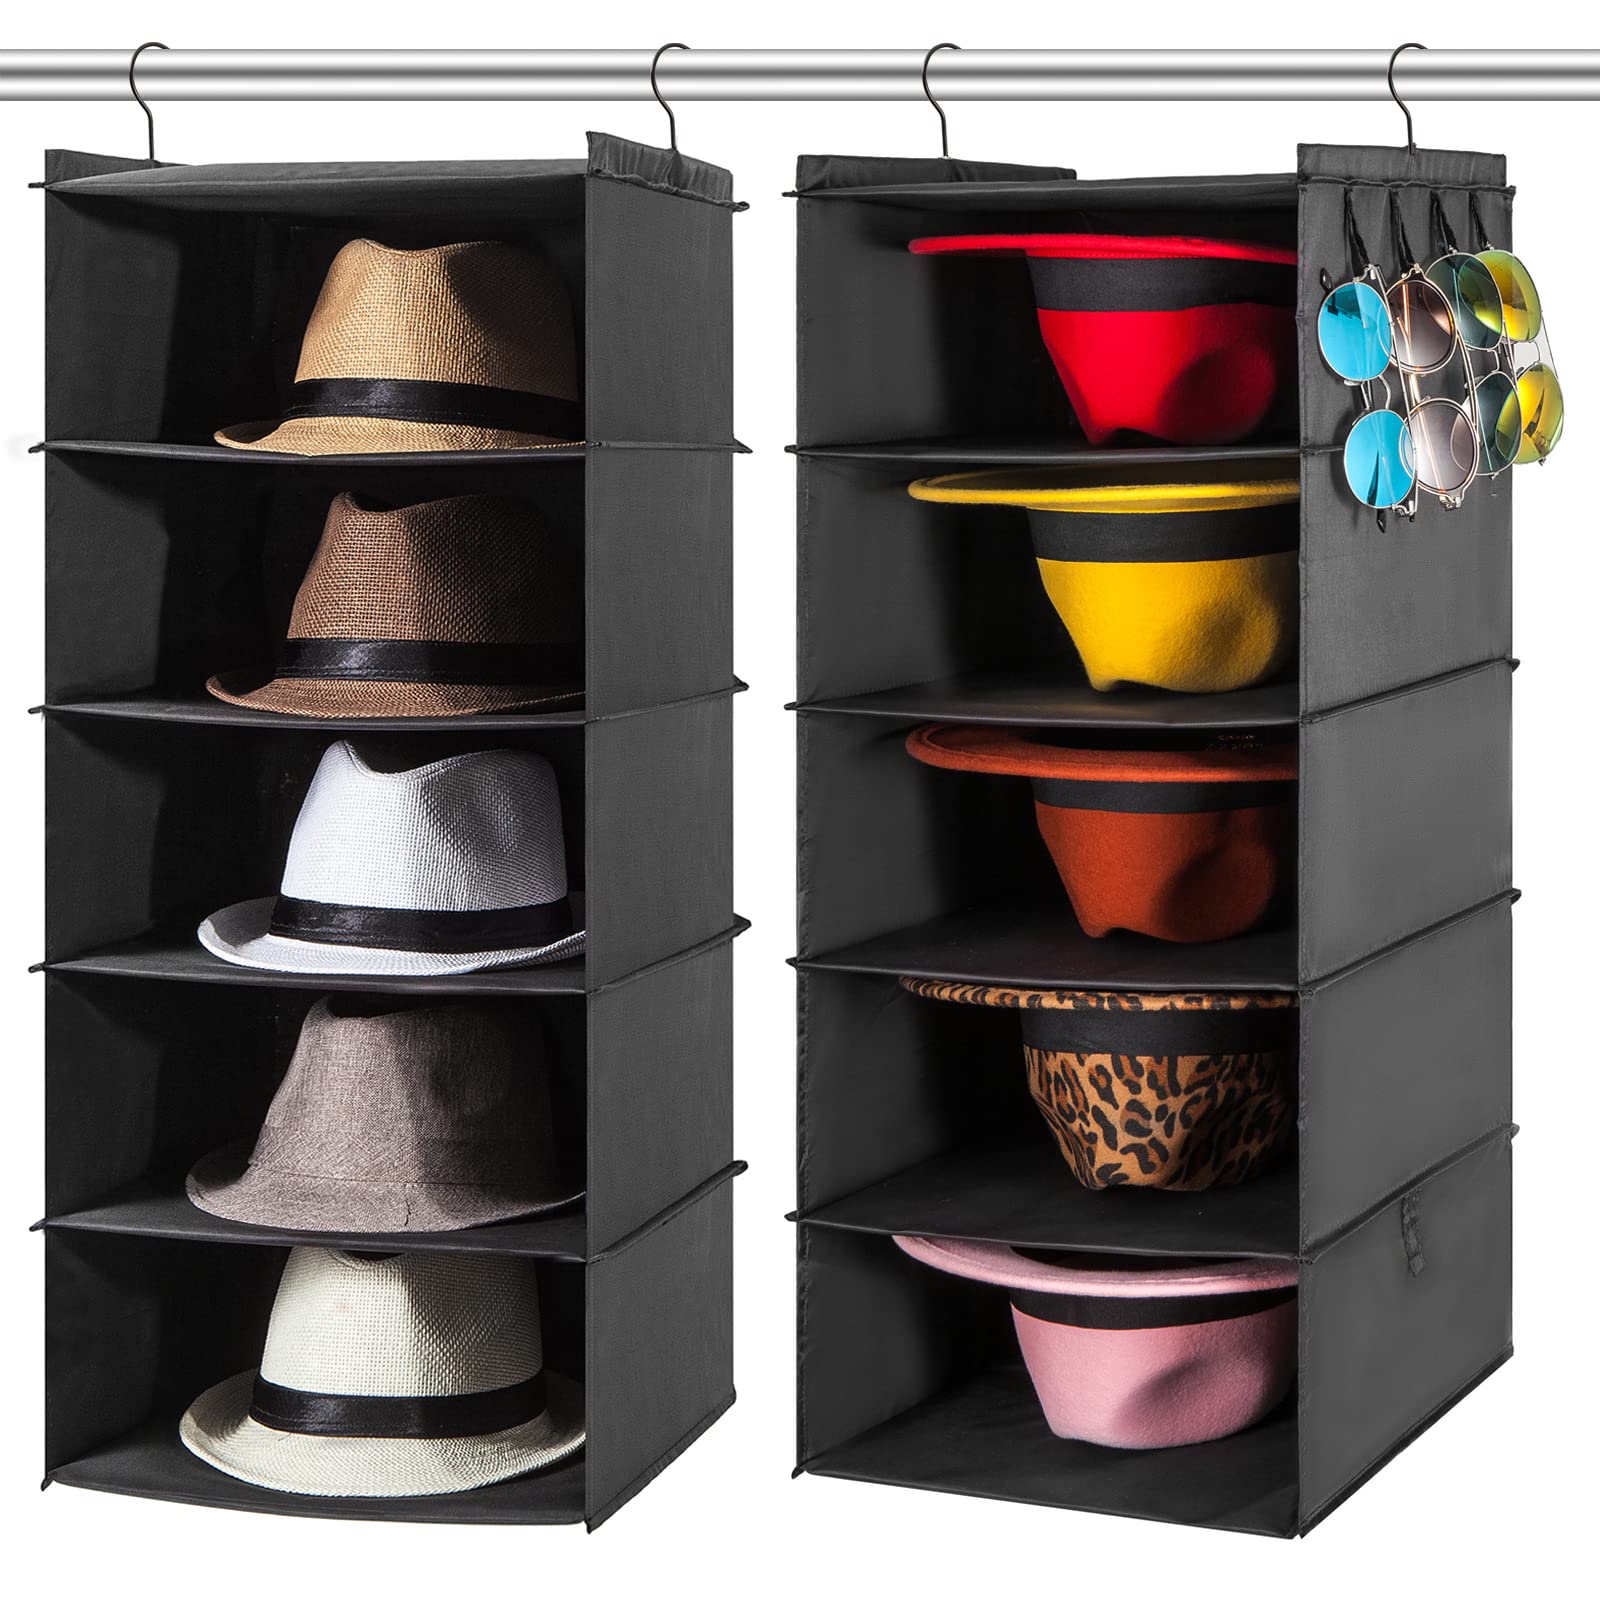 How To Store A Cowboy Hat